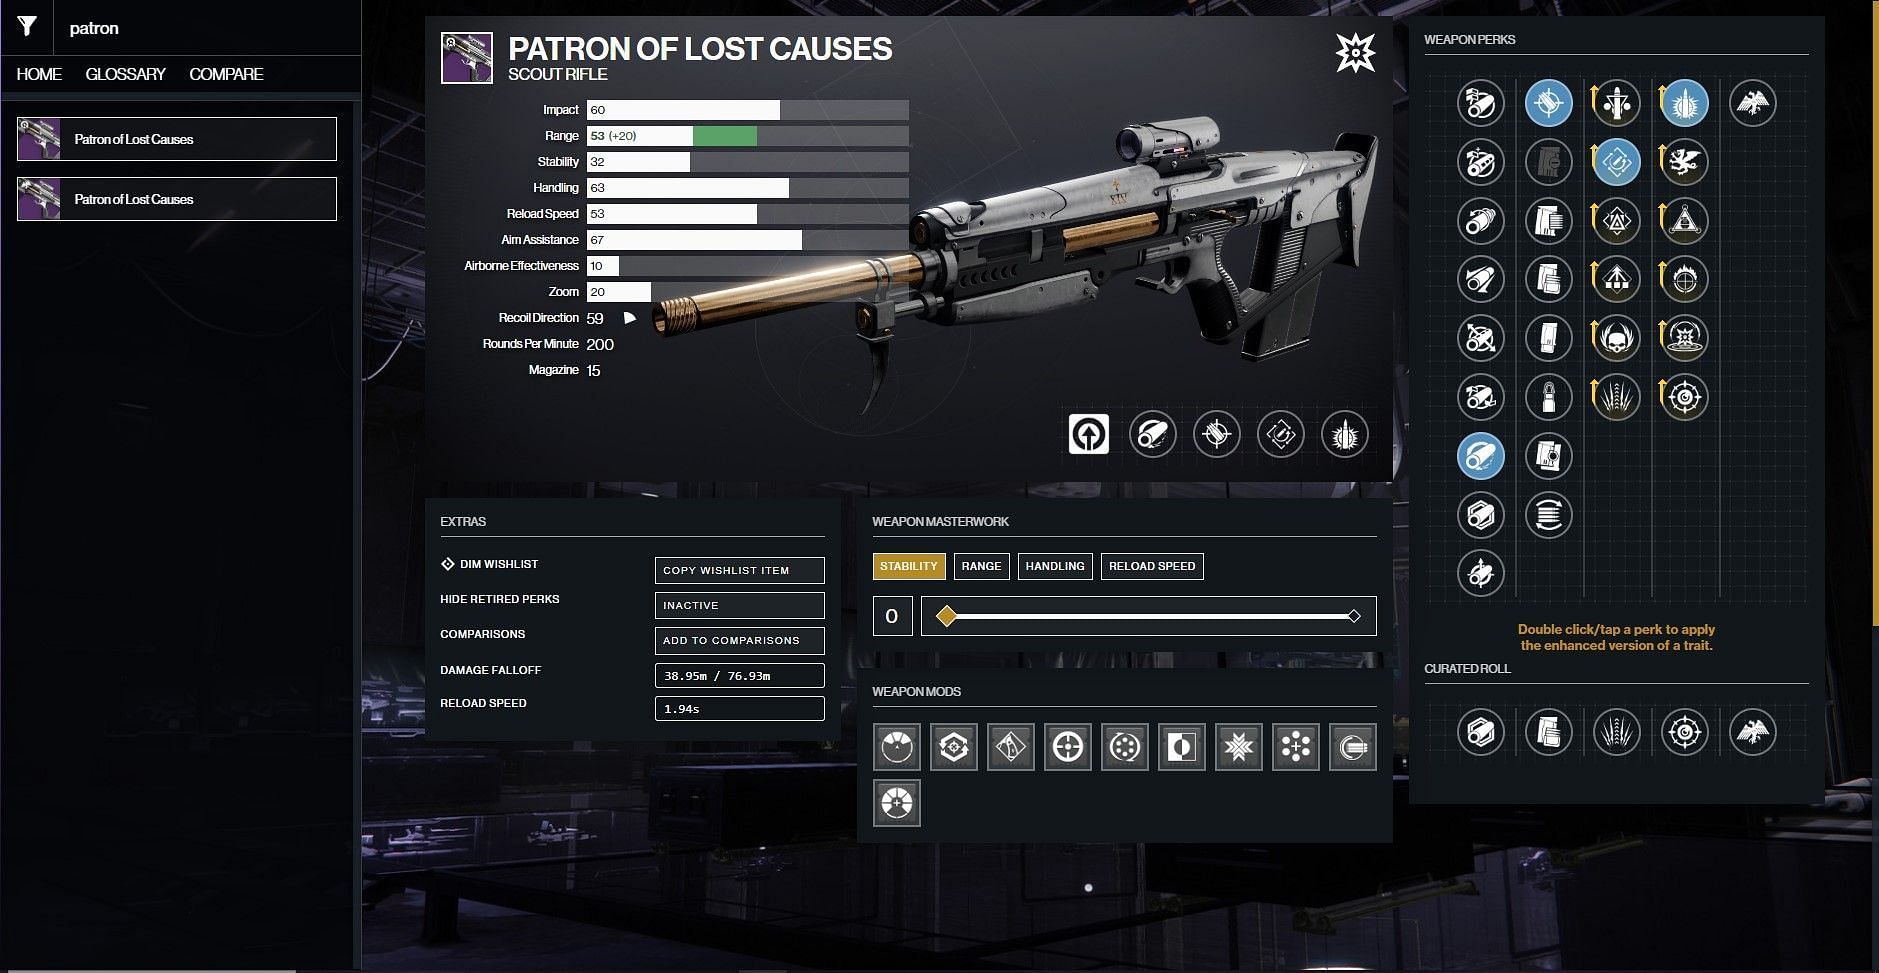 Patron of Lost Causes PvP god roll in Destiny 2 (Image via D2Gunsmith)